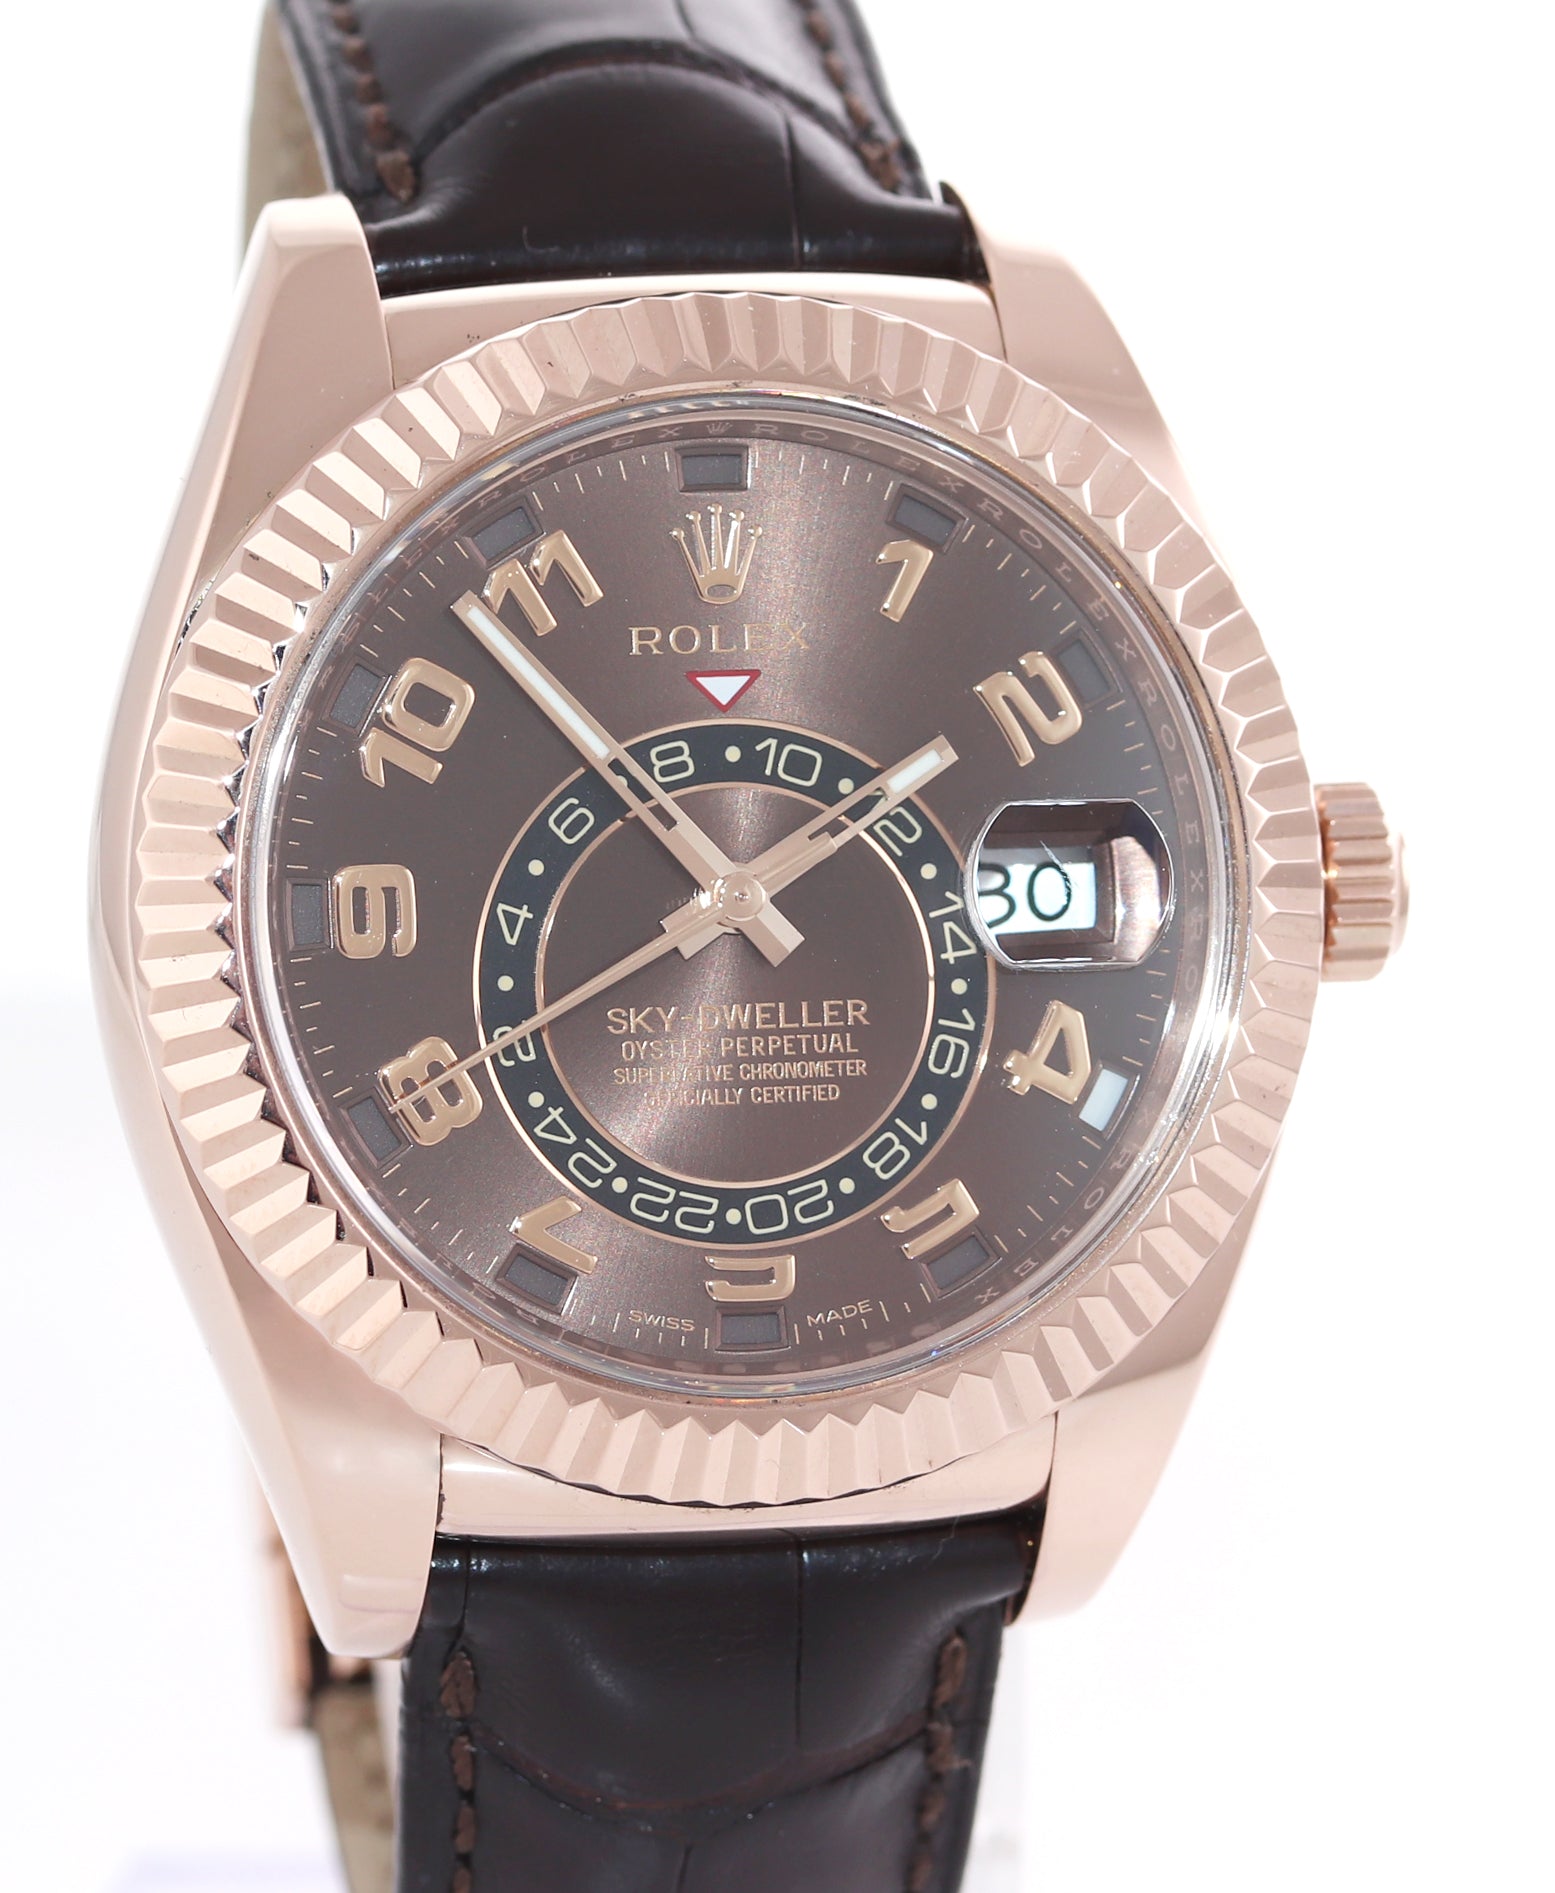 PAPERS 2018 Rolex Sky-Dweller 18K Rose Gold 326135 42mm Chocolate Leather Watch